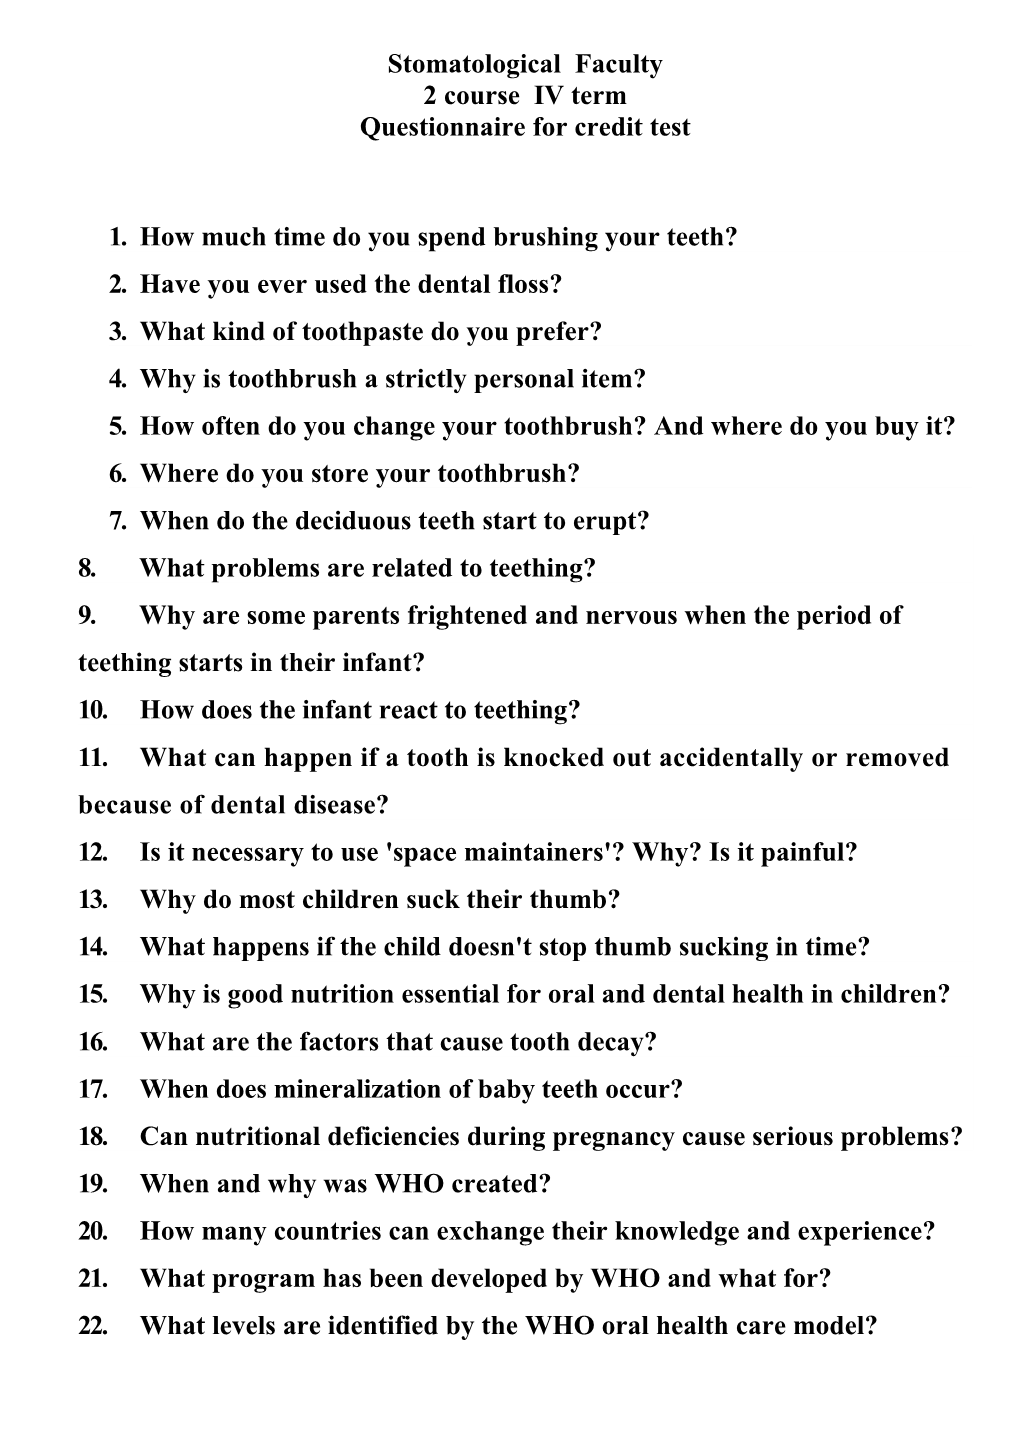 Questionnaire for Credit Test